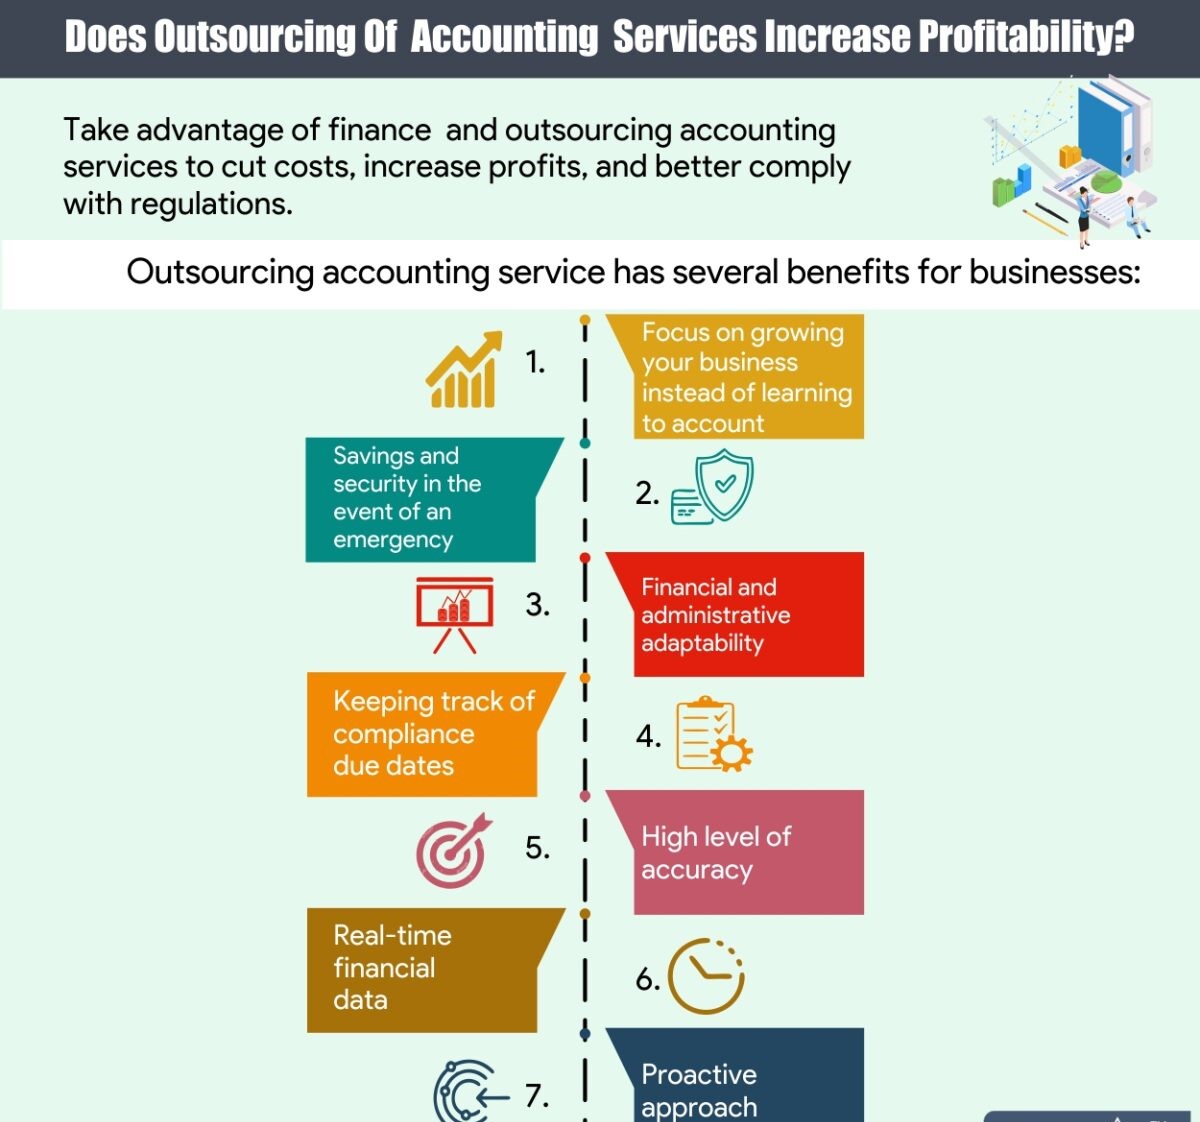 Accounting-Services-Increase-Profitability.